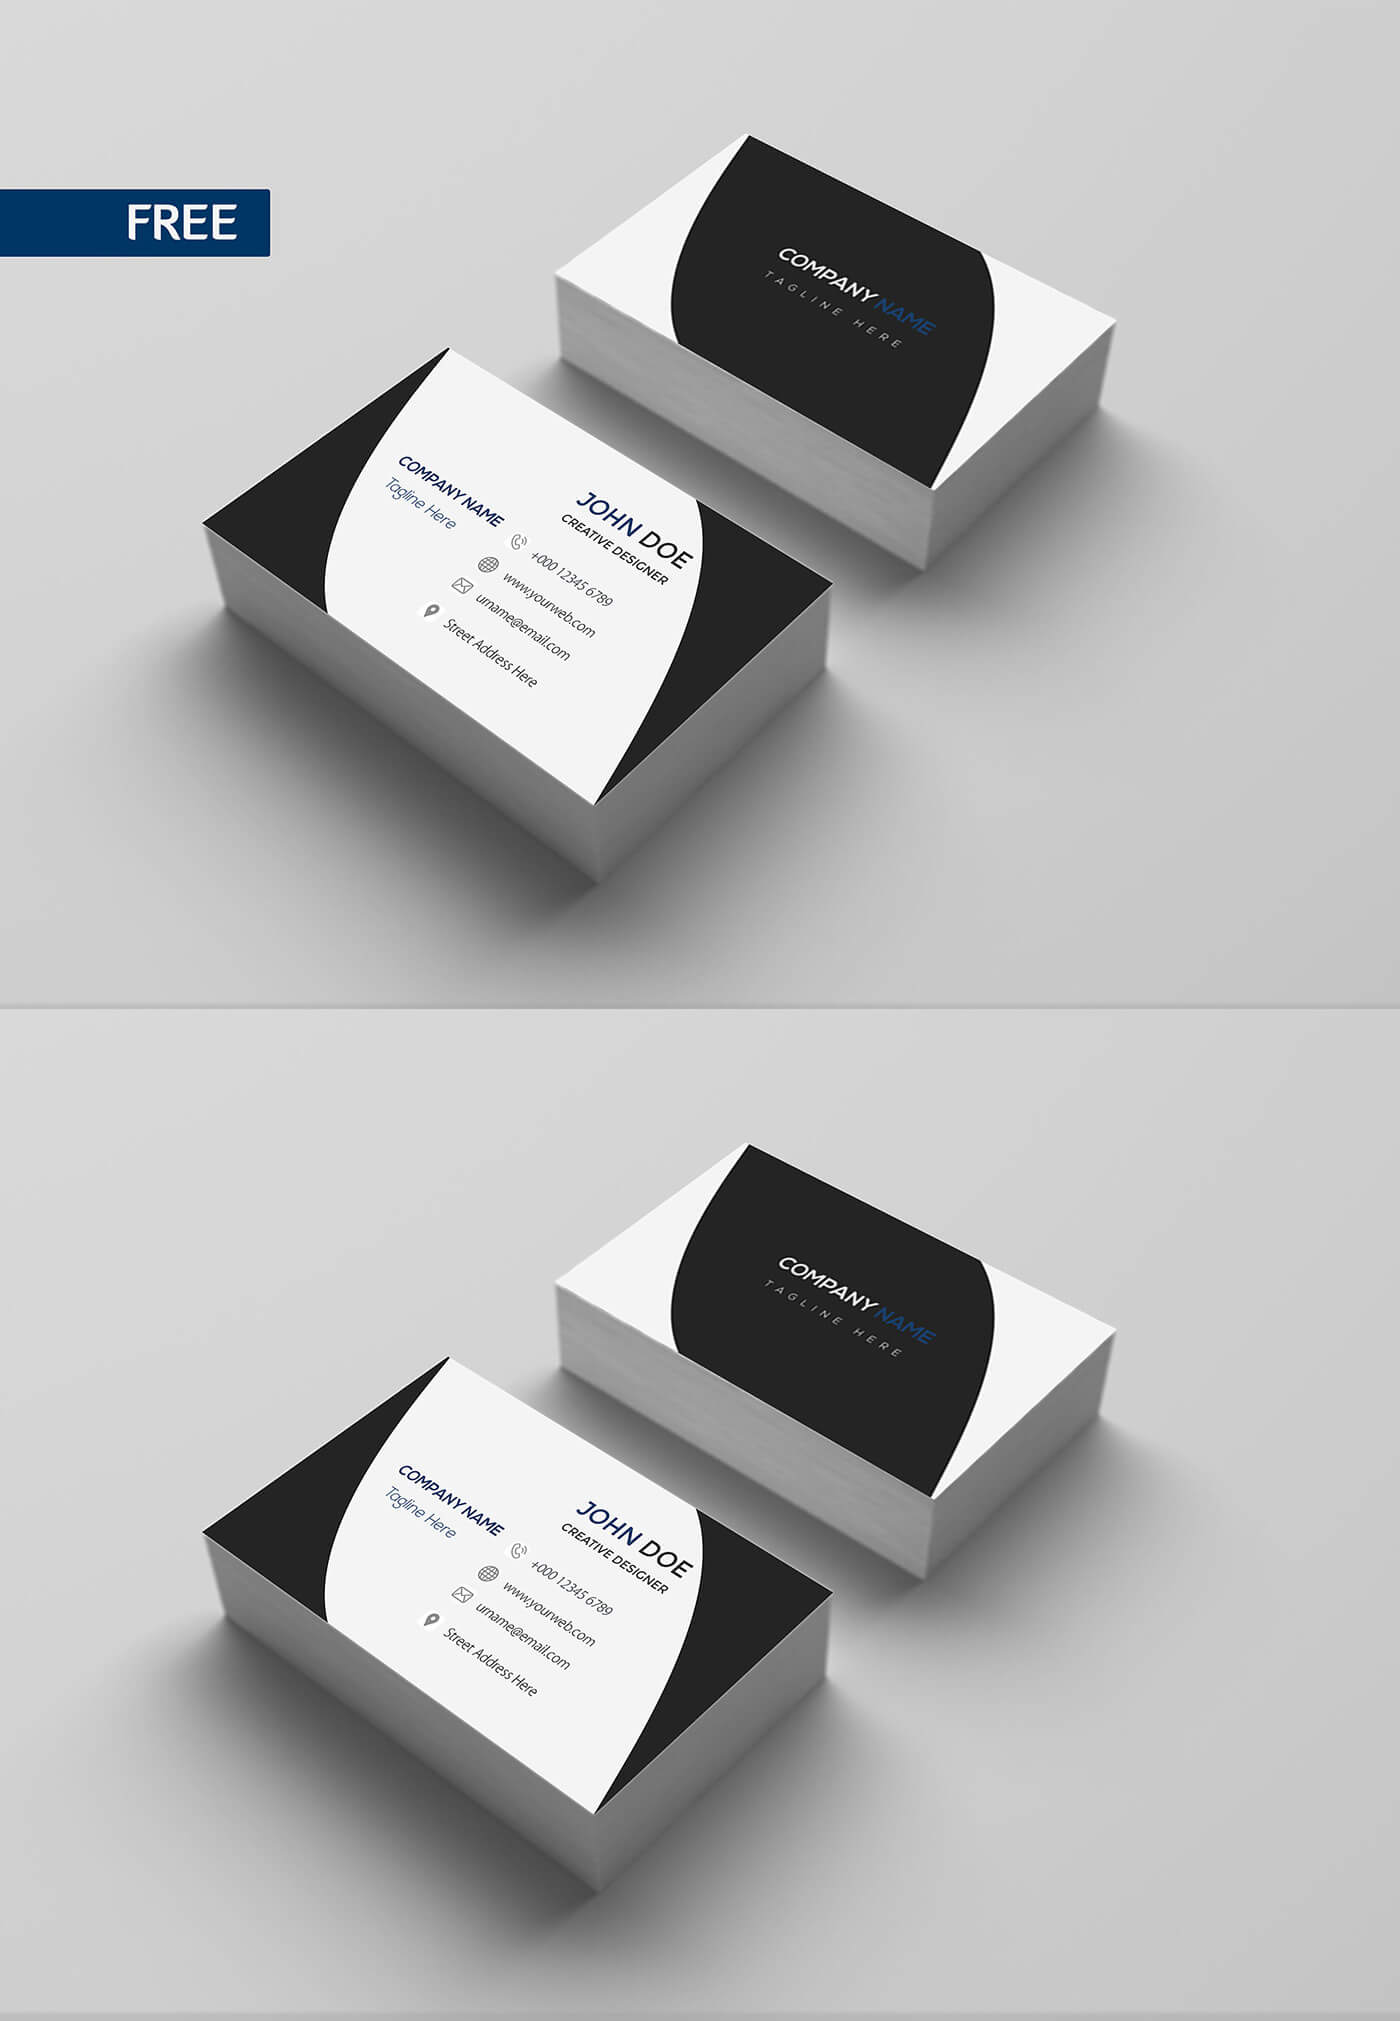 Free Print Design Business Card Template On Behance Throughout Template For Cards To Print Free